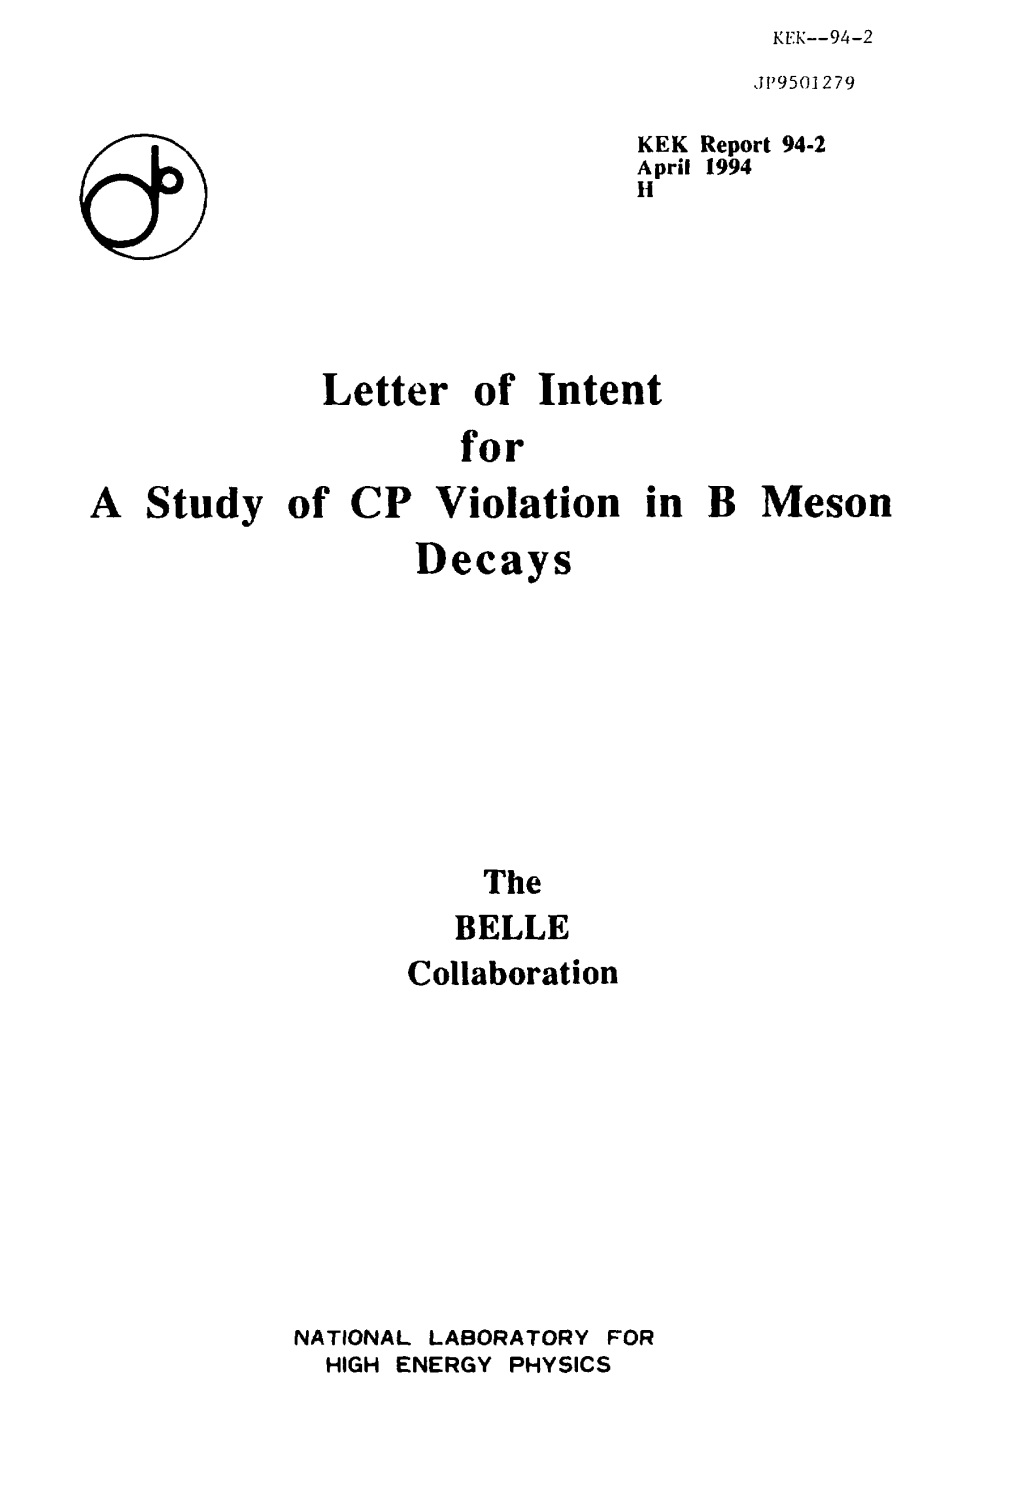 Letter of Intent for a Study of CP Violation in B Meson Decays